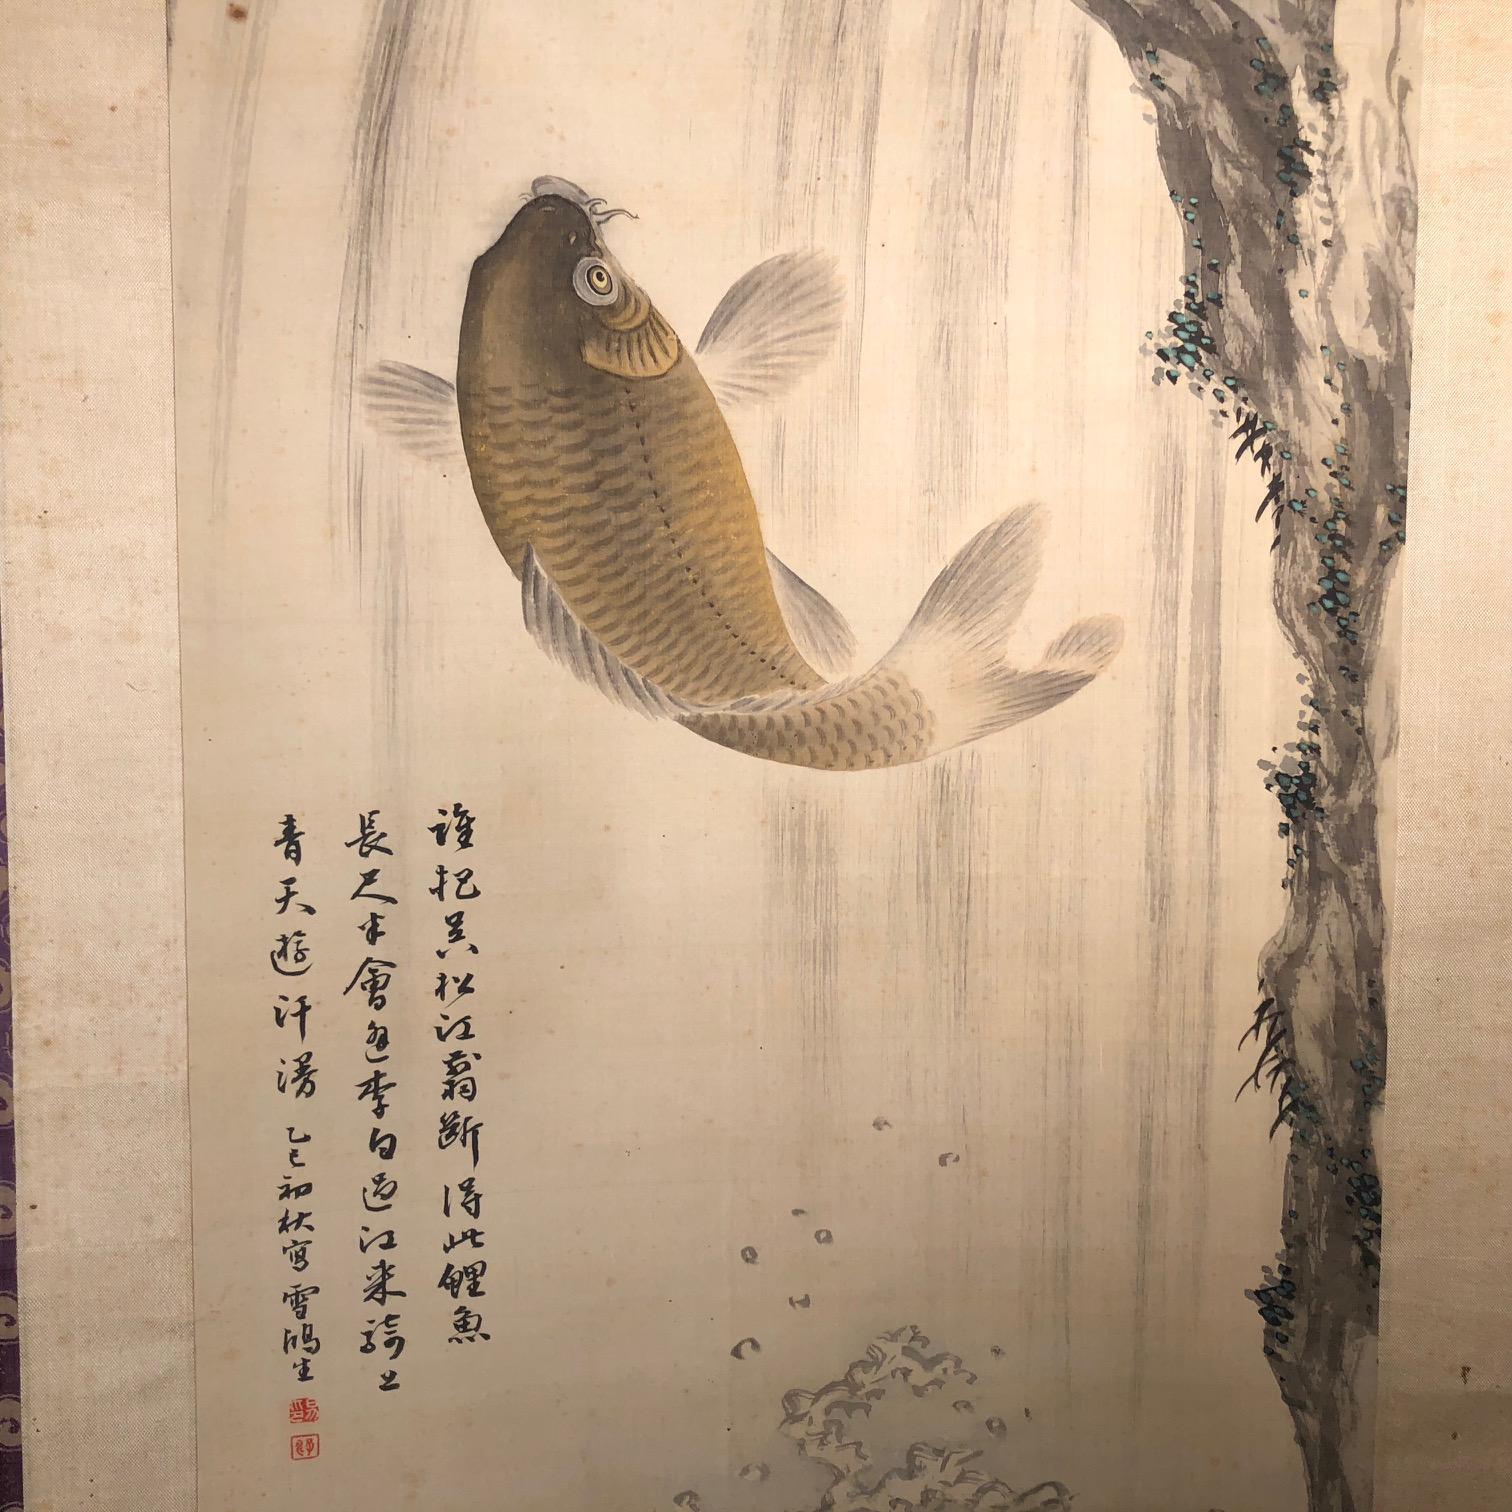 Magnificent Koi Fish Japanese Antique Hand-Painted Silk Scroll, Meiji Period 1